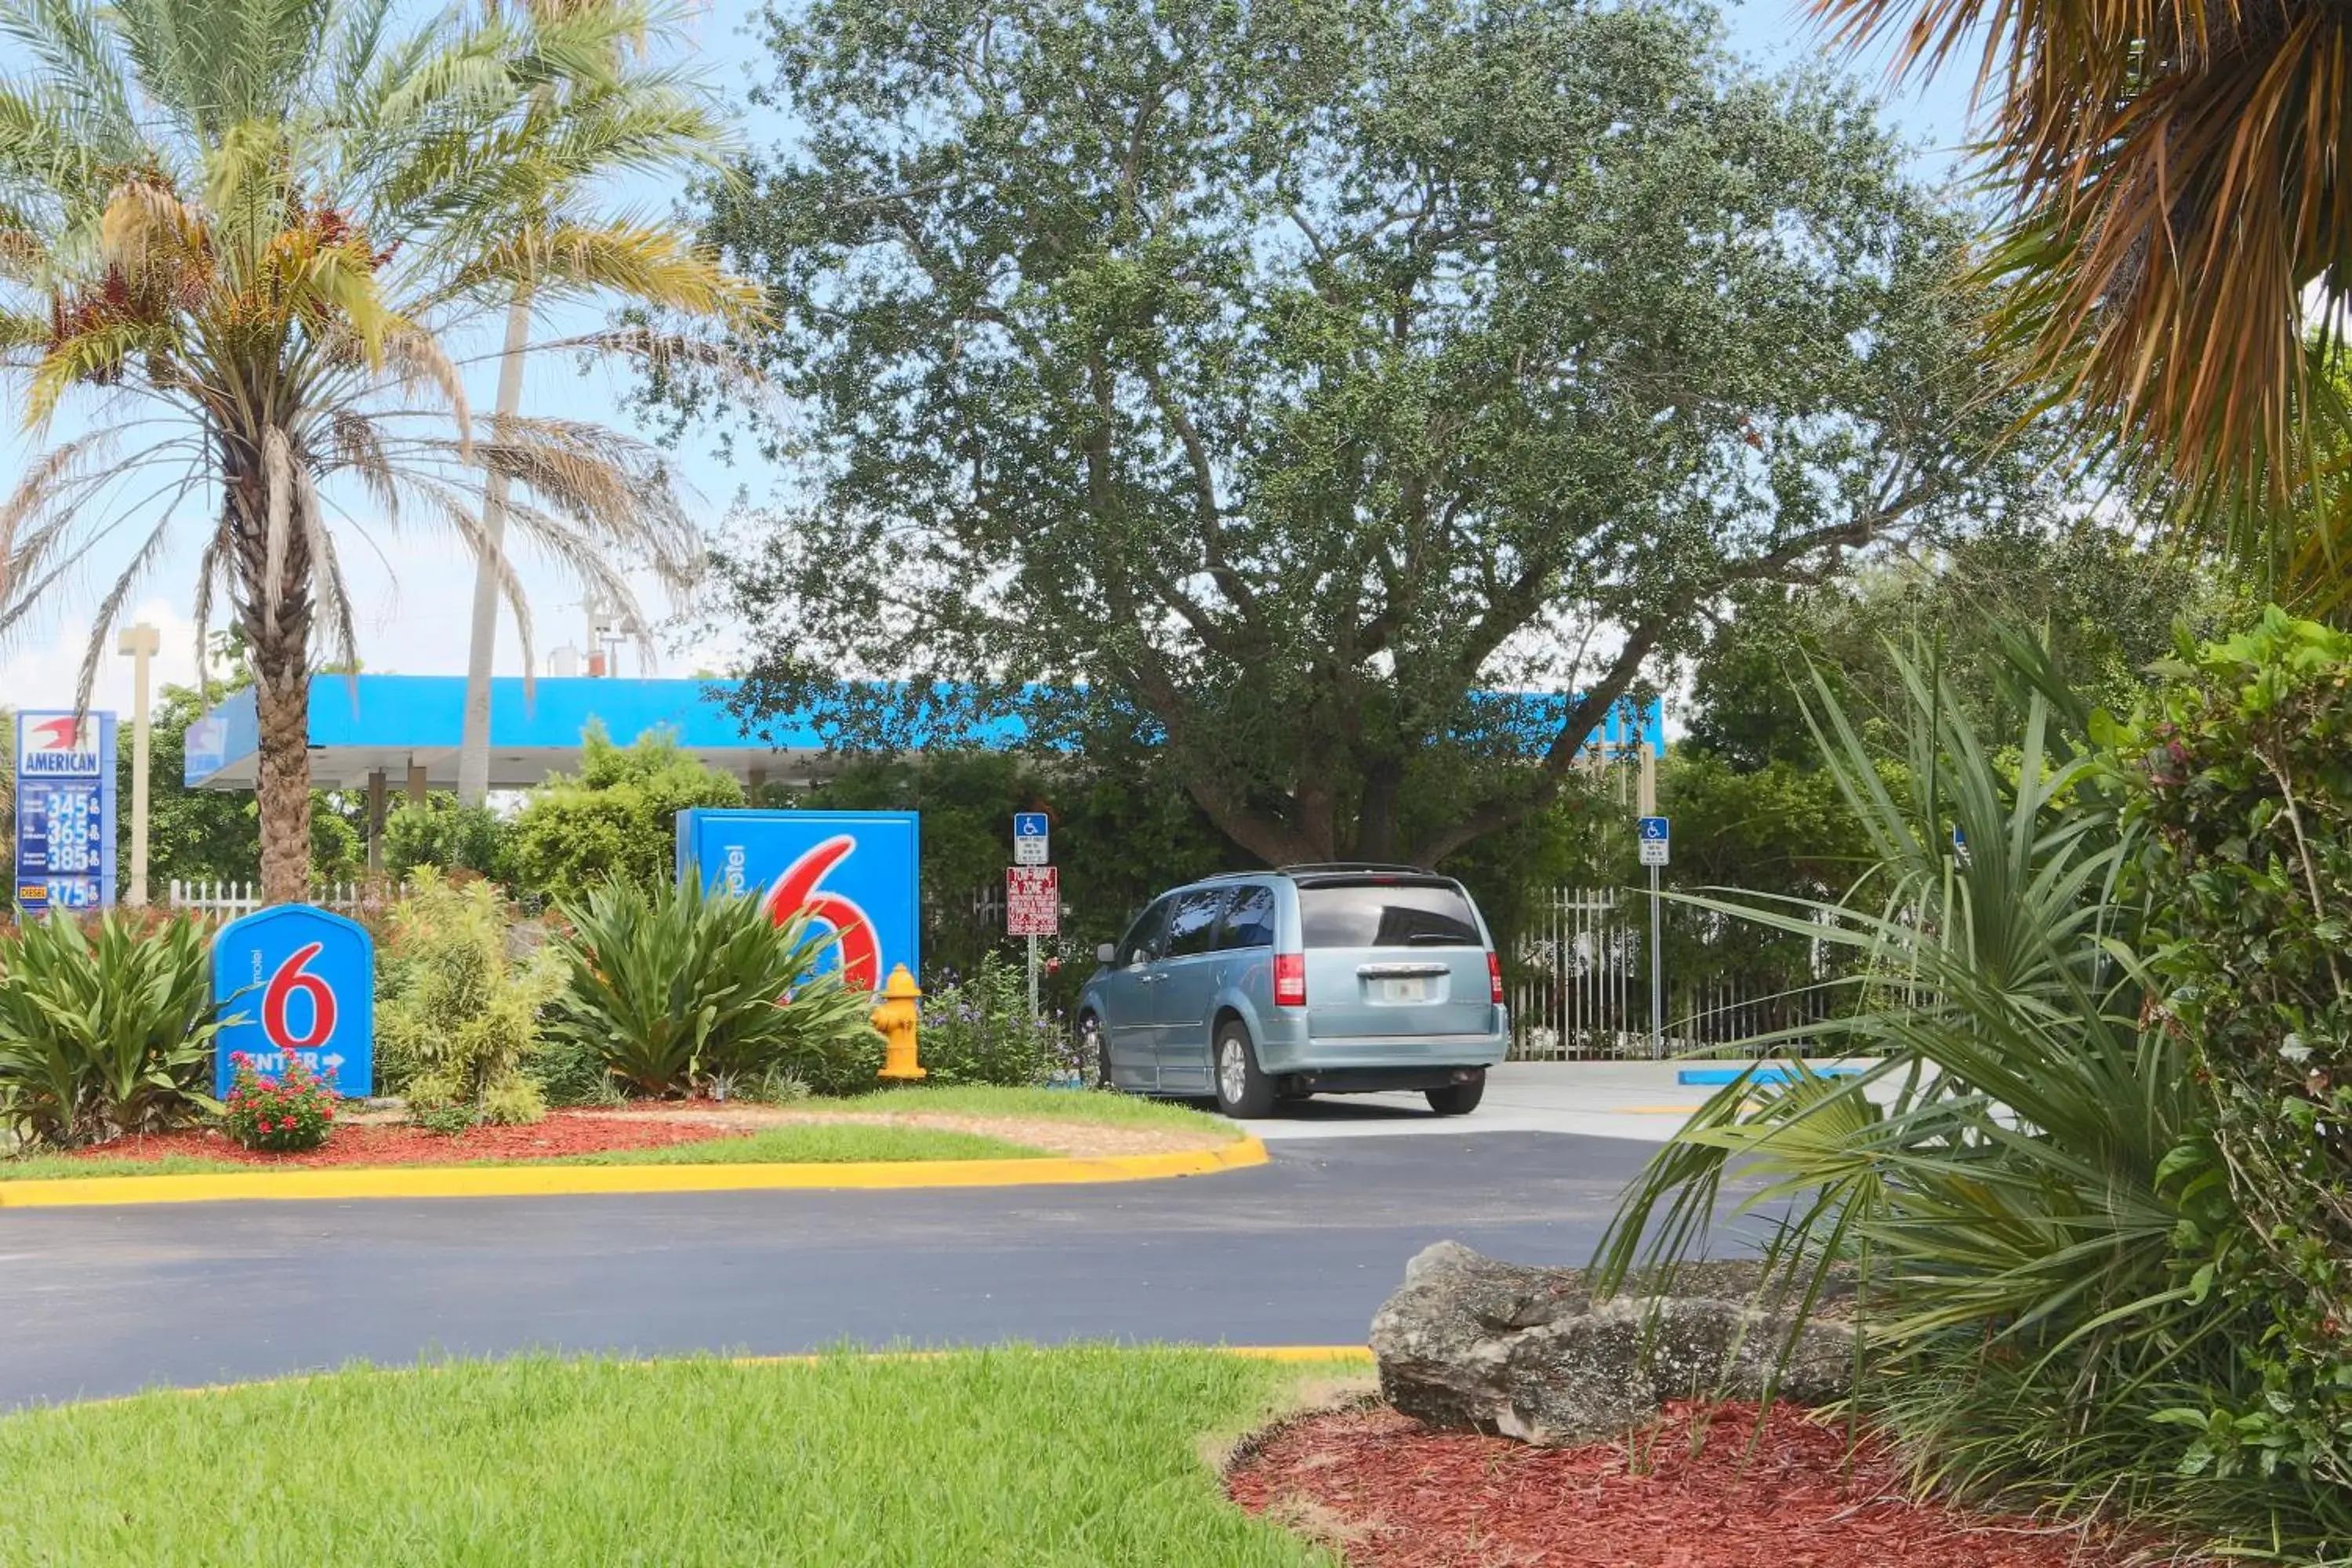 Area and facilities in Motel 6-Cutler Bay, FL